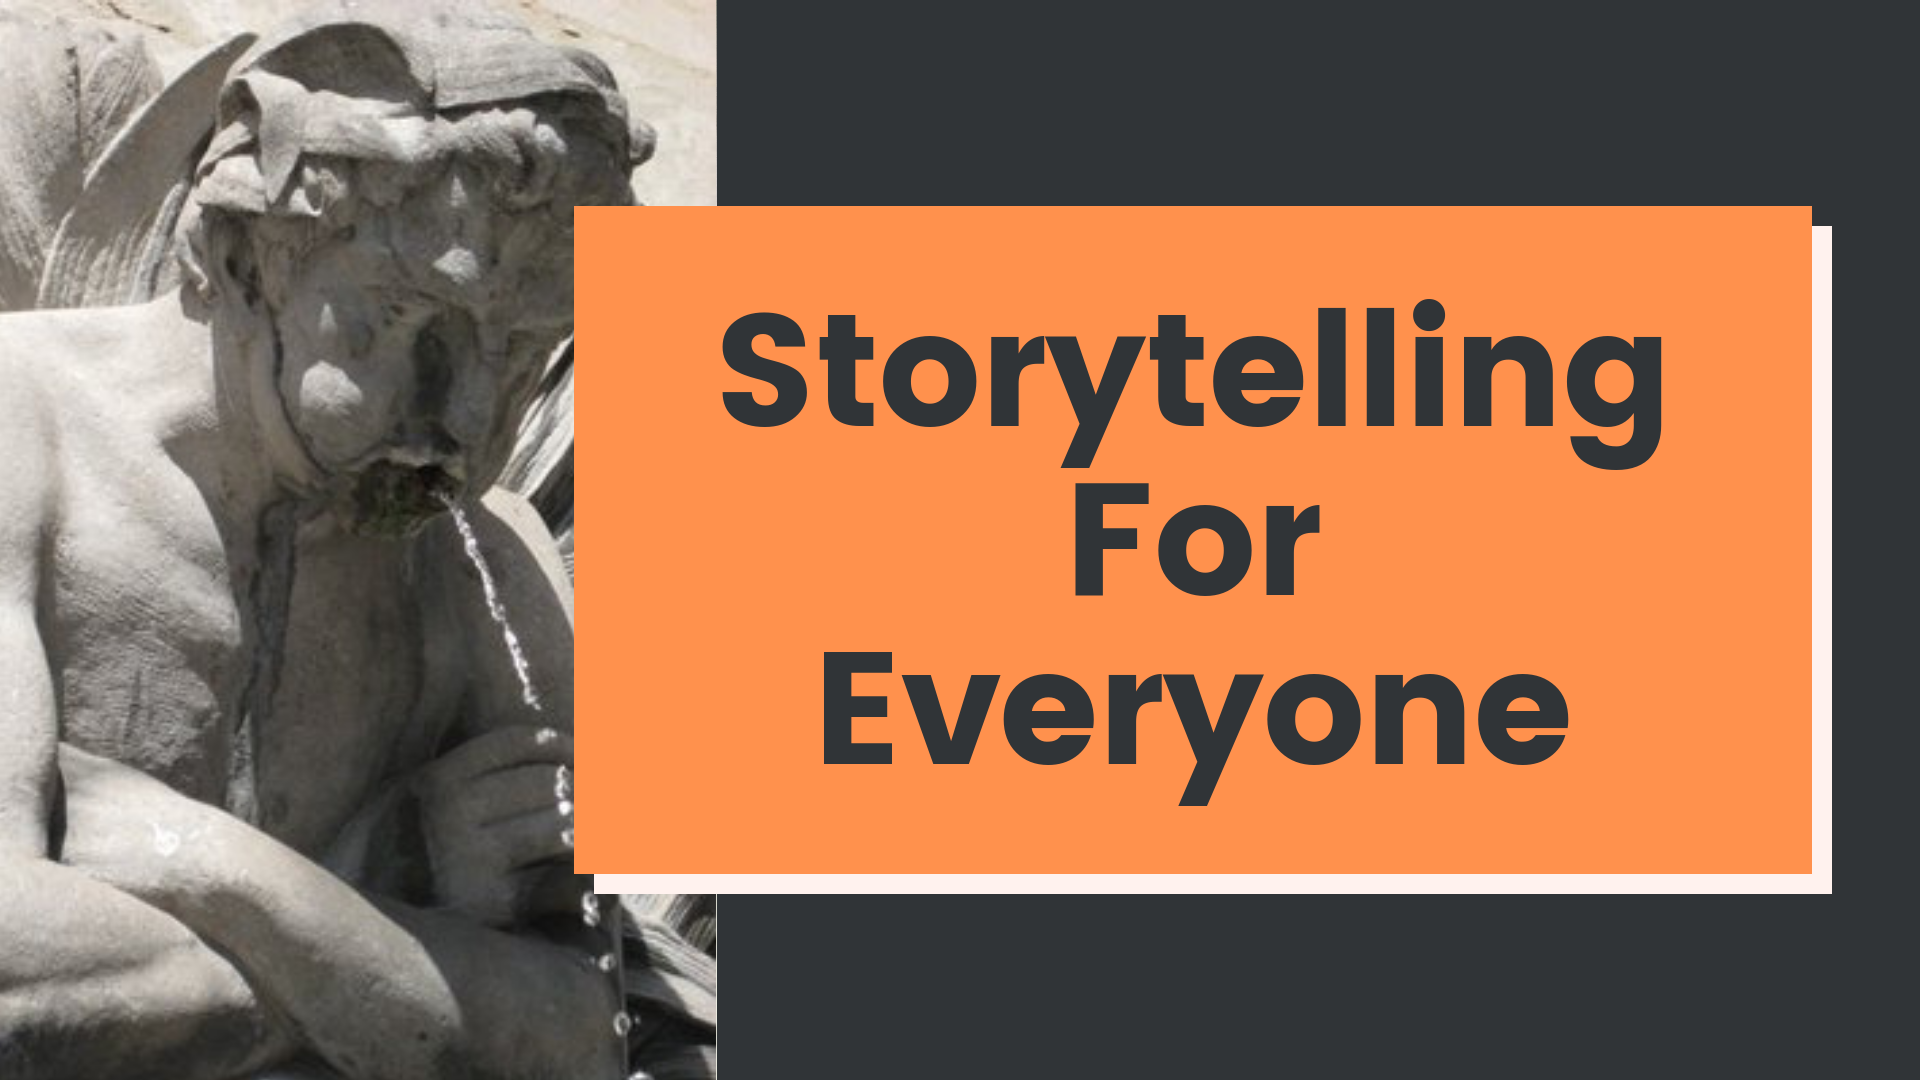 Storytelling For Everyone: A Four Week Course in Personal Narrative (Mondays - April 2020)